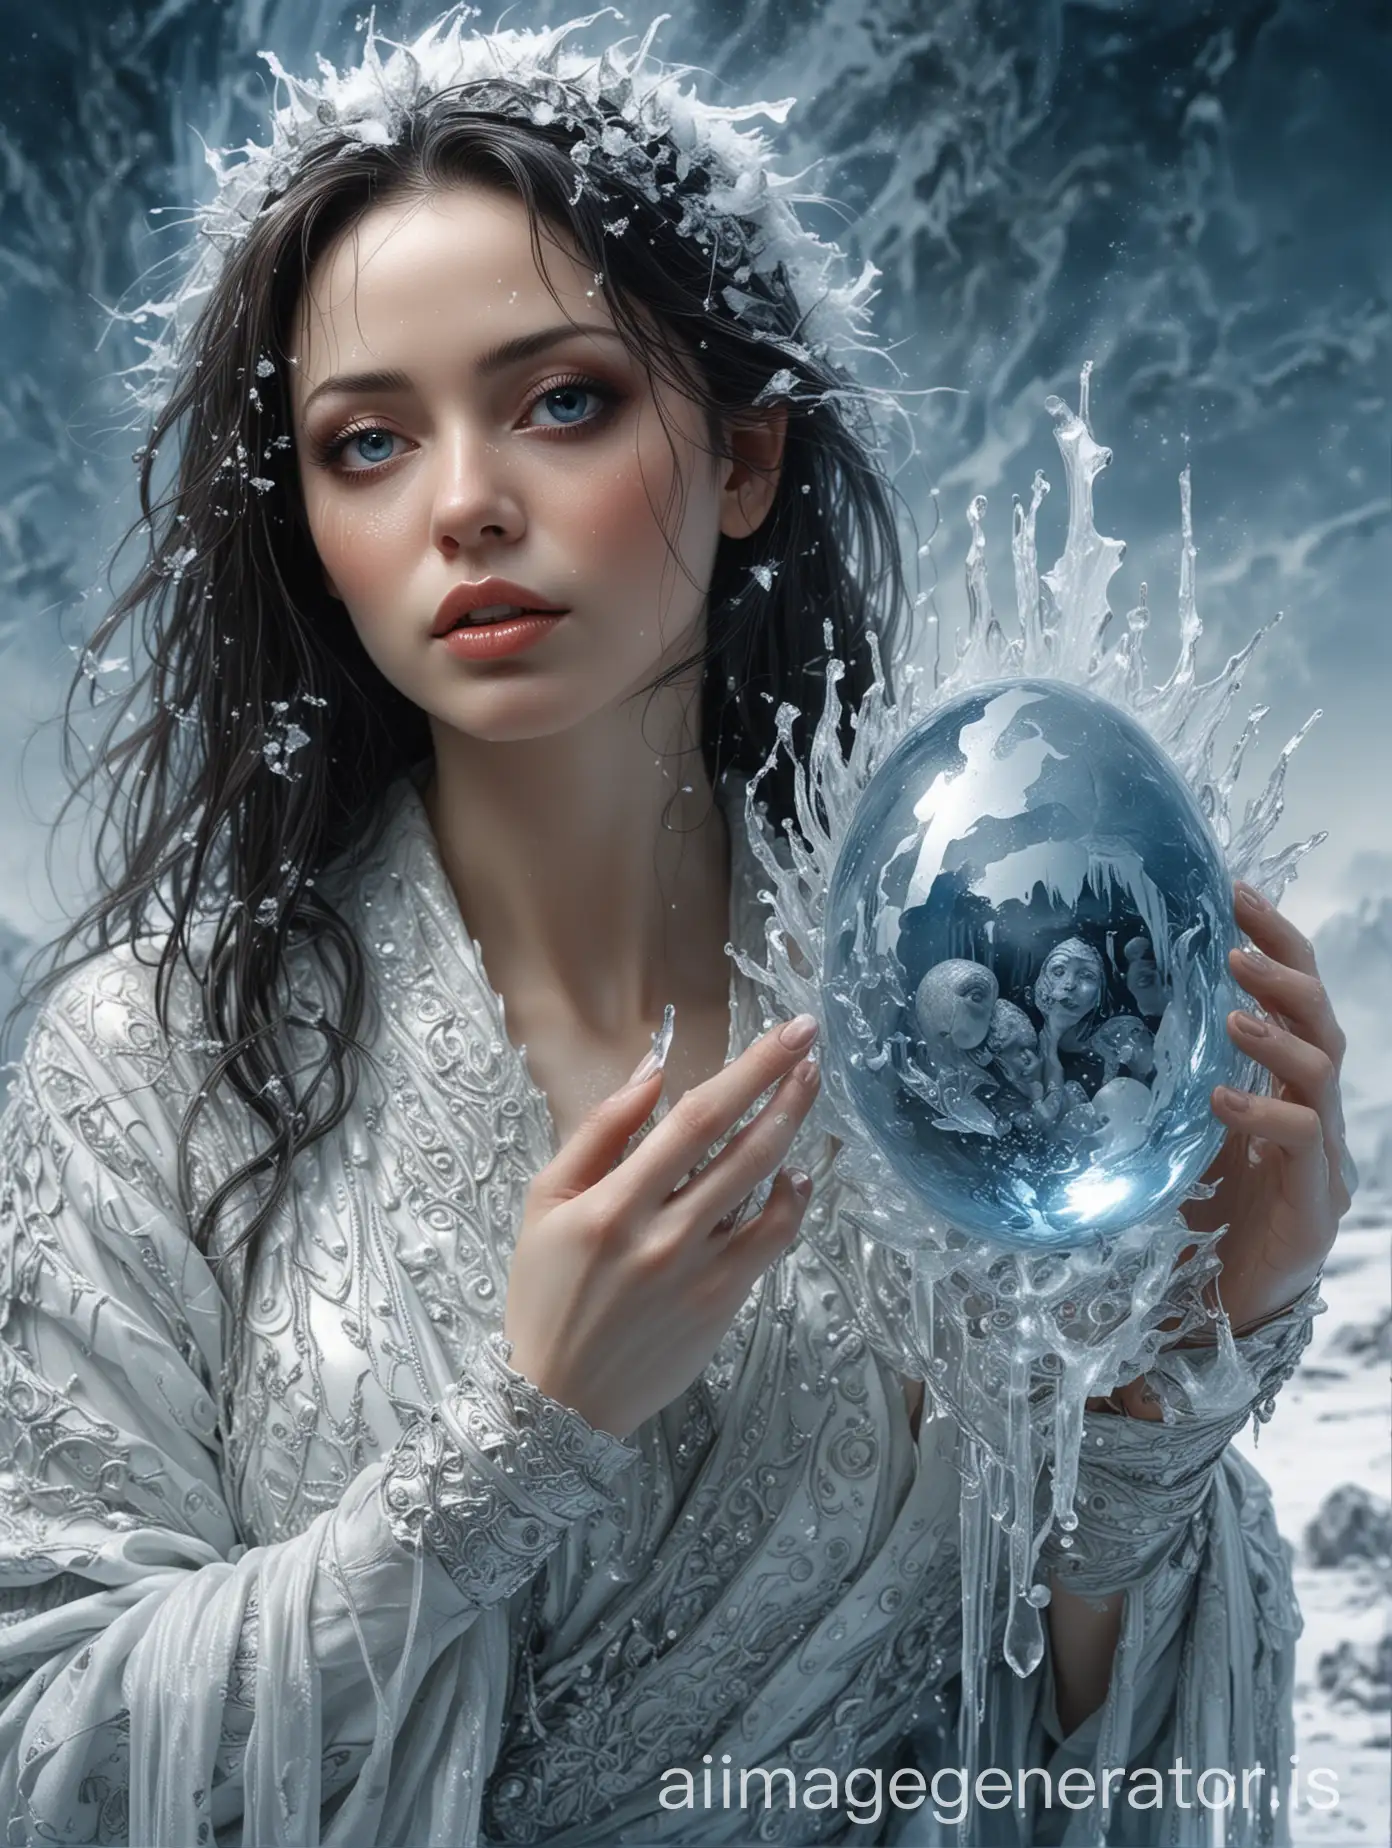 Glacial-Woman-Holding-Dragon-Egg-in-Winter-Landscape